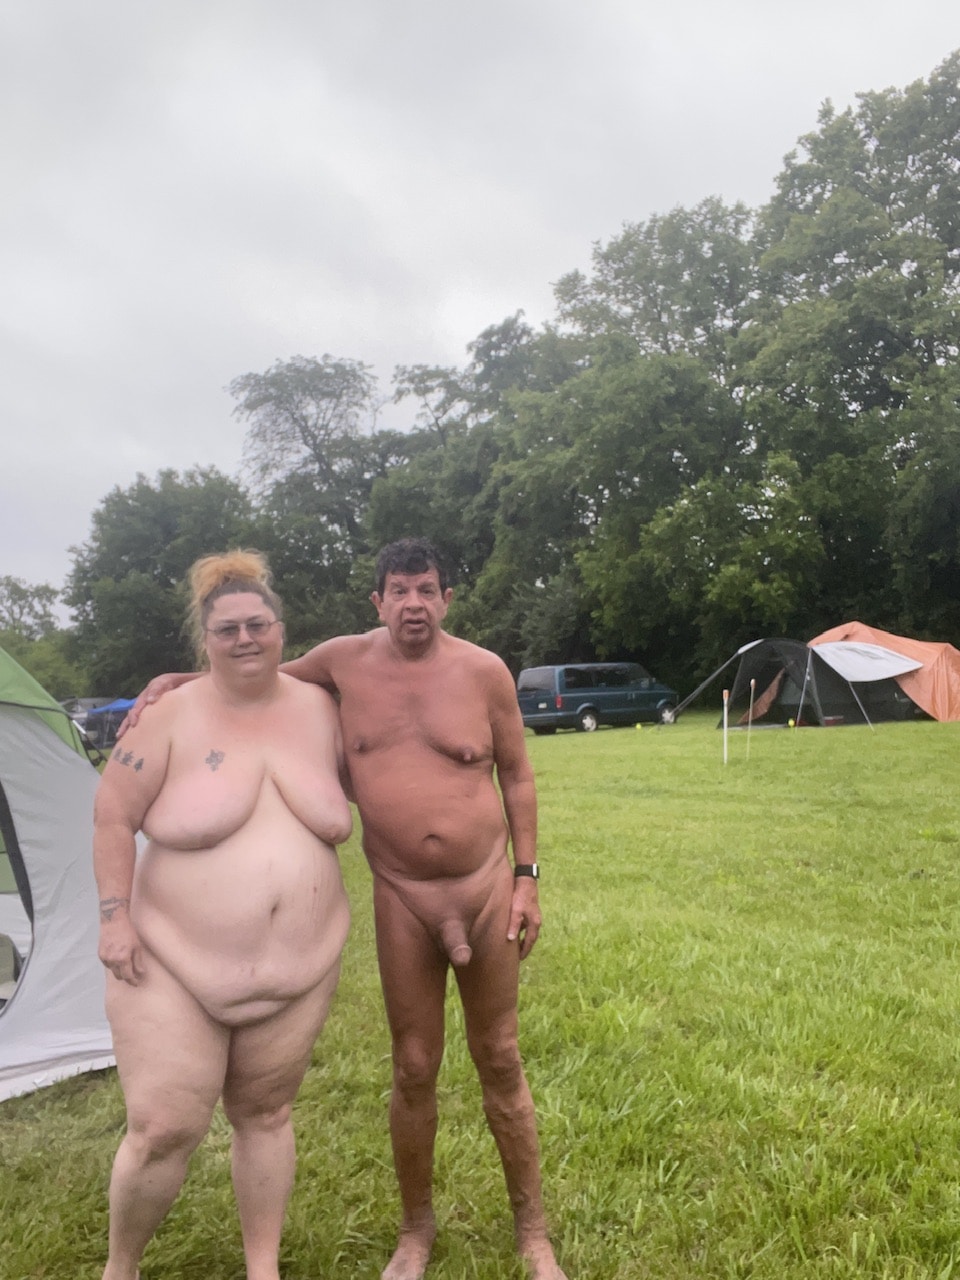 dickflash camping - We love camping in the nude - Real Amateurs